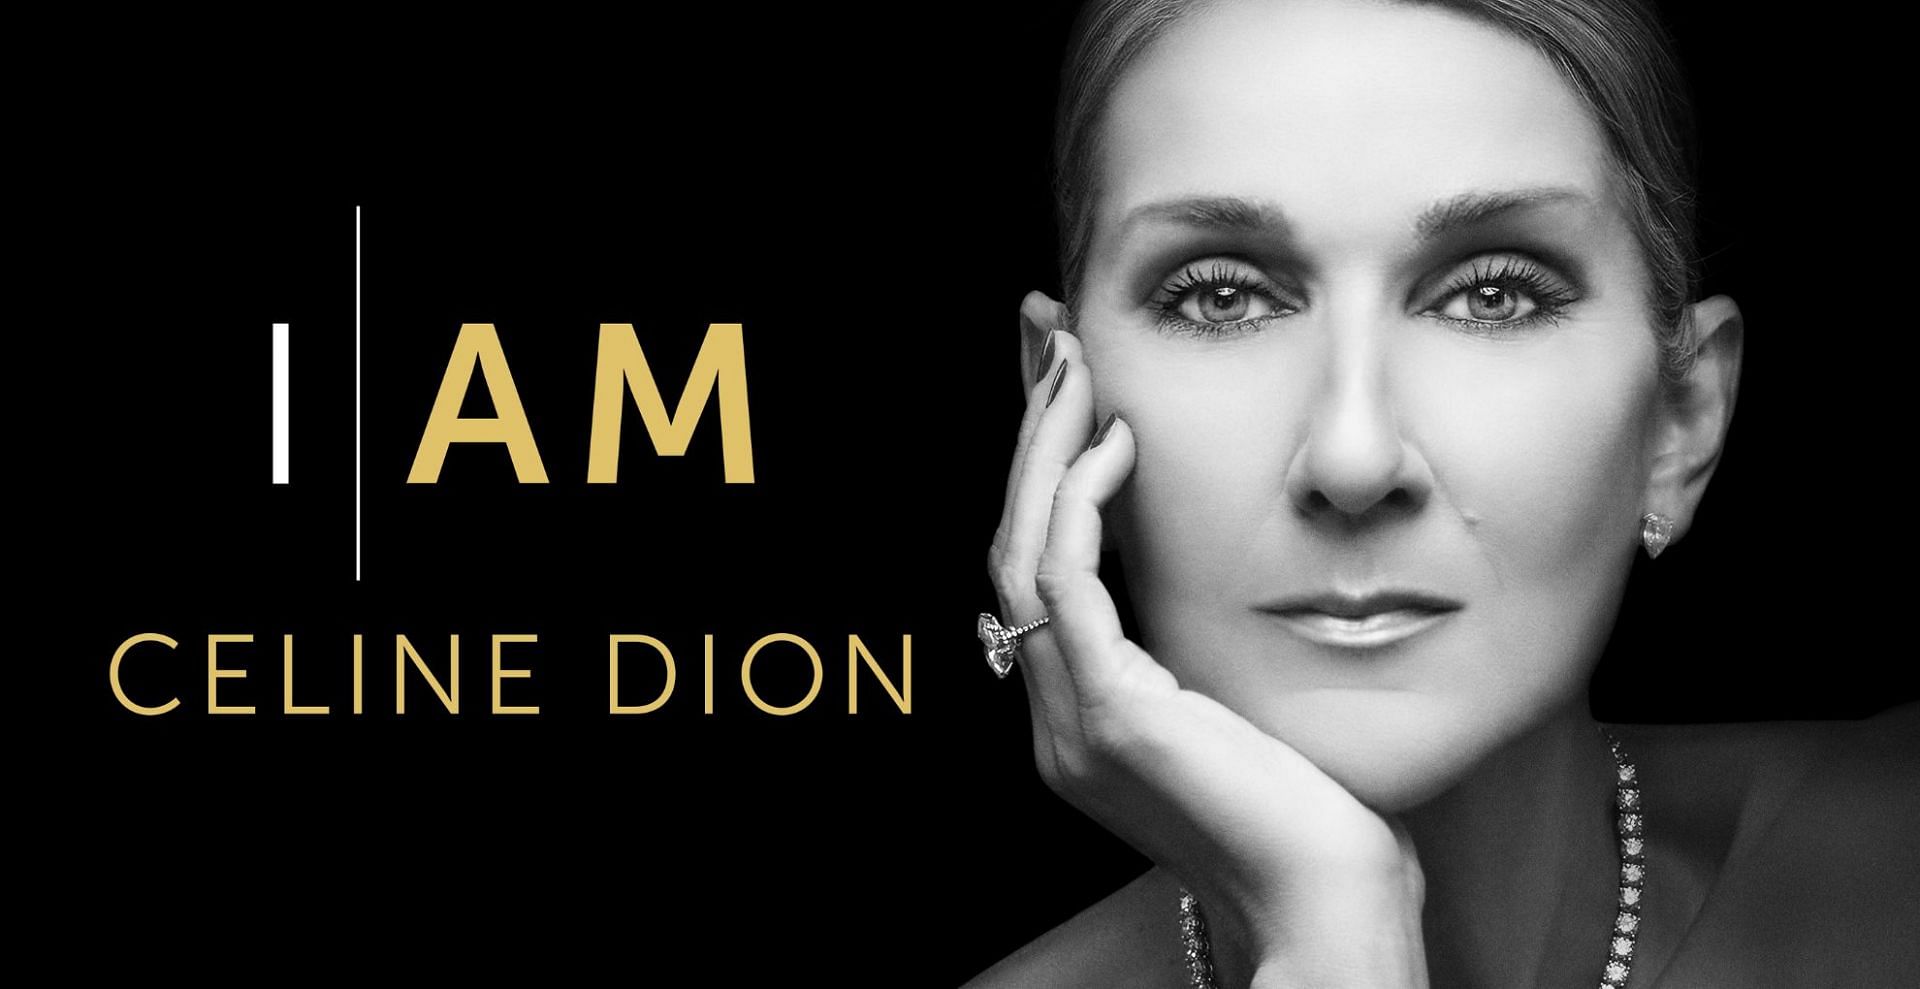 Where to watch I Am: Celine Dion documentary online? Streaming options explored